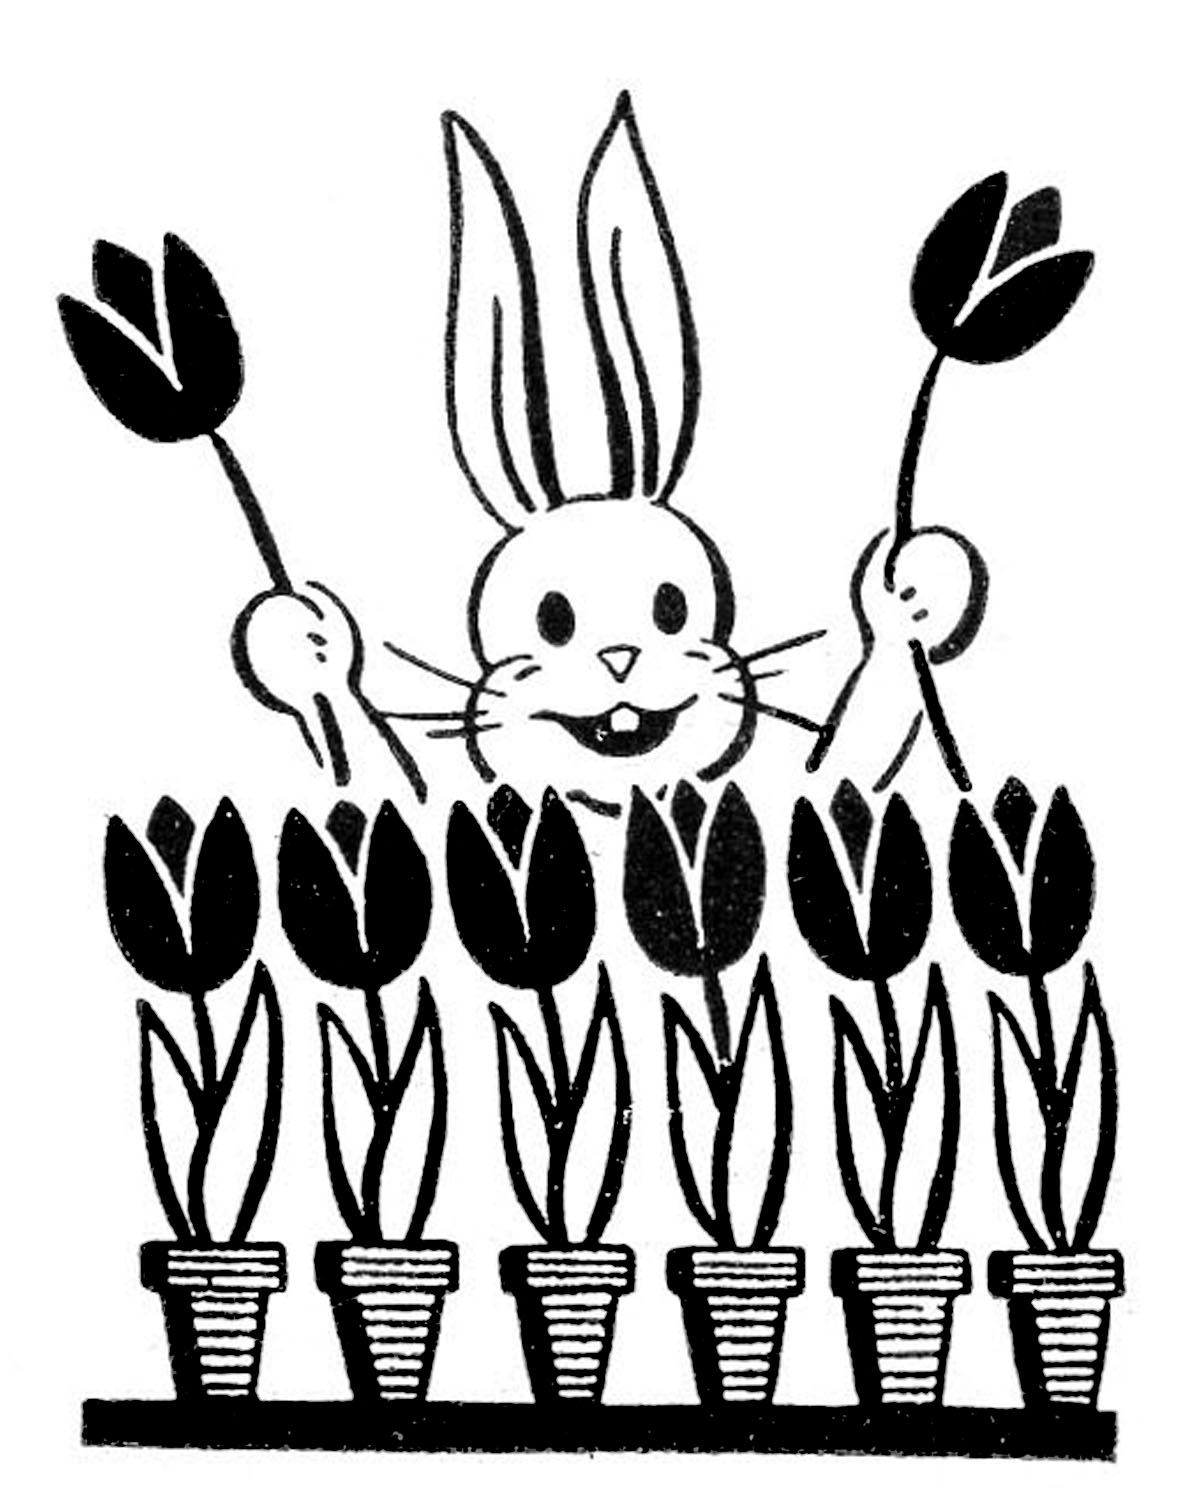 Retro Easter Bunny Images - The Graphics Fairy